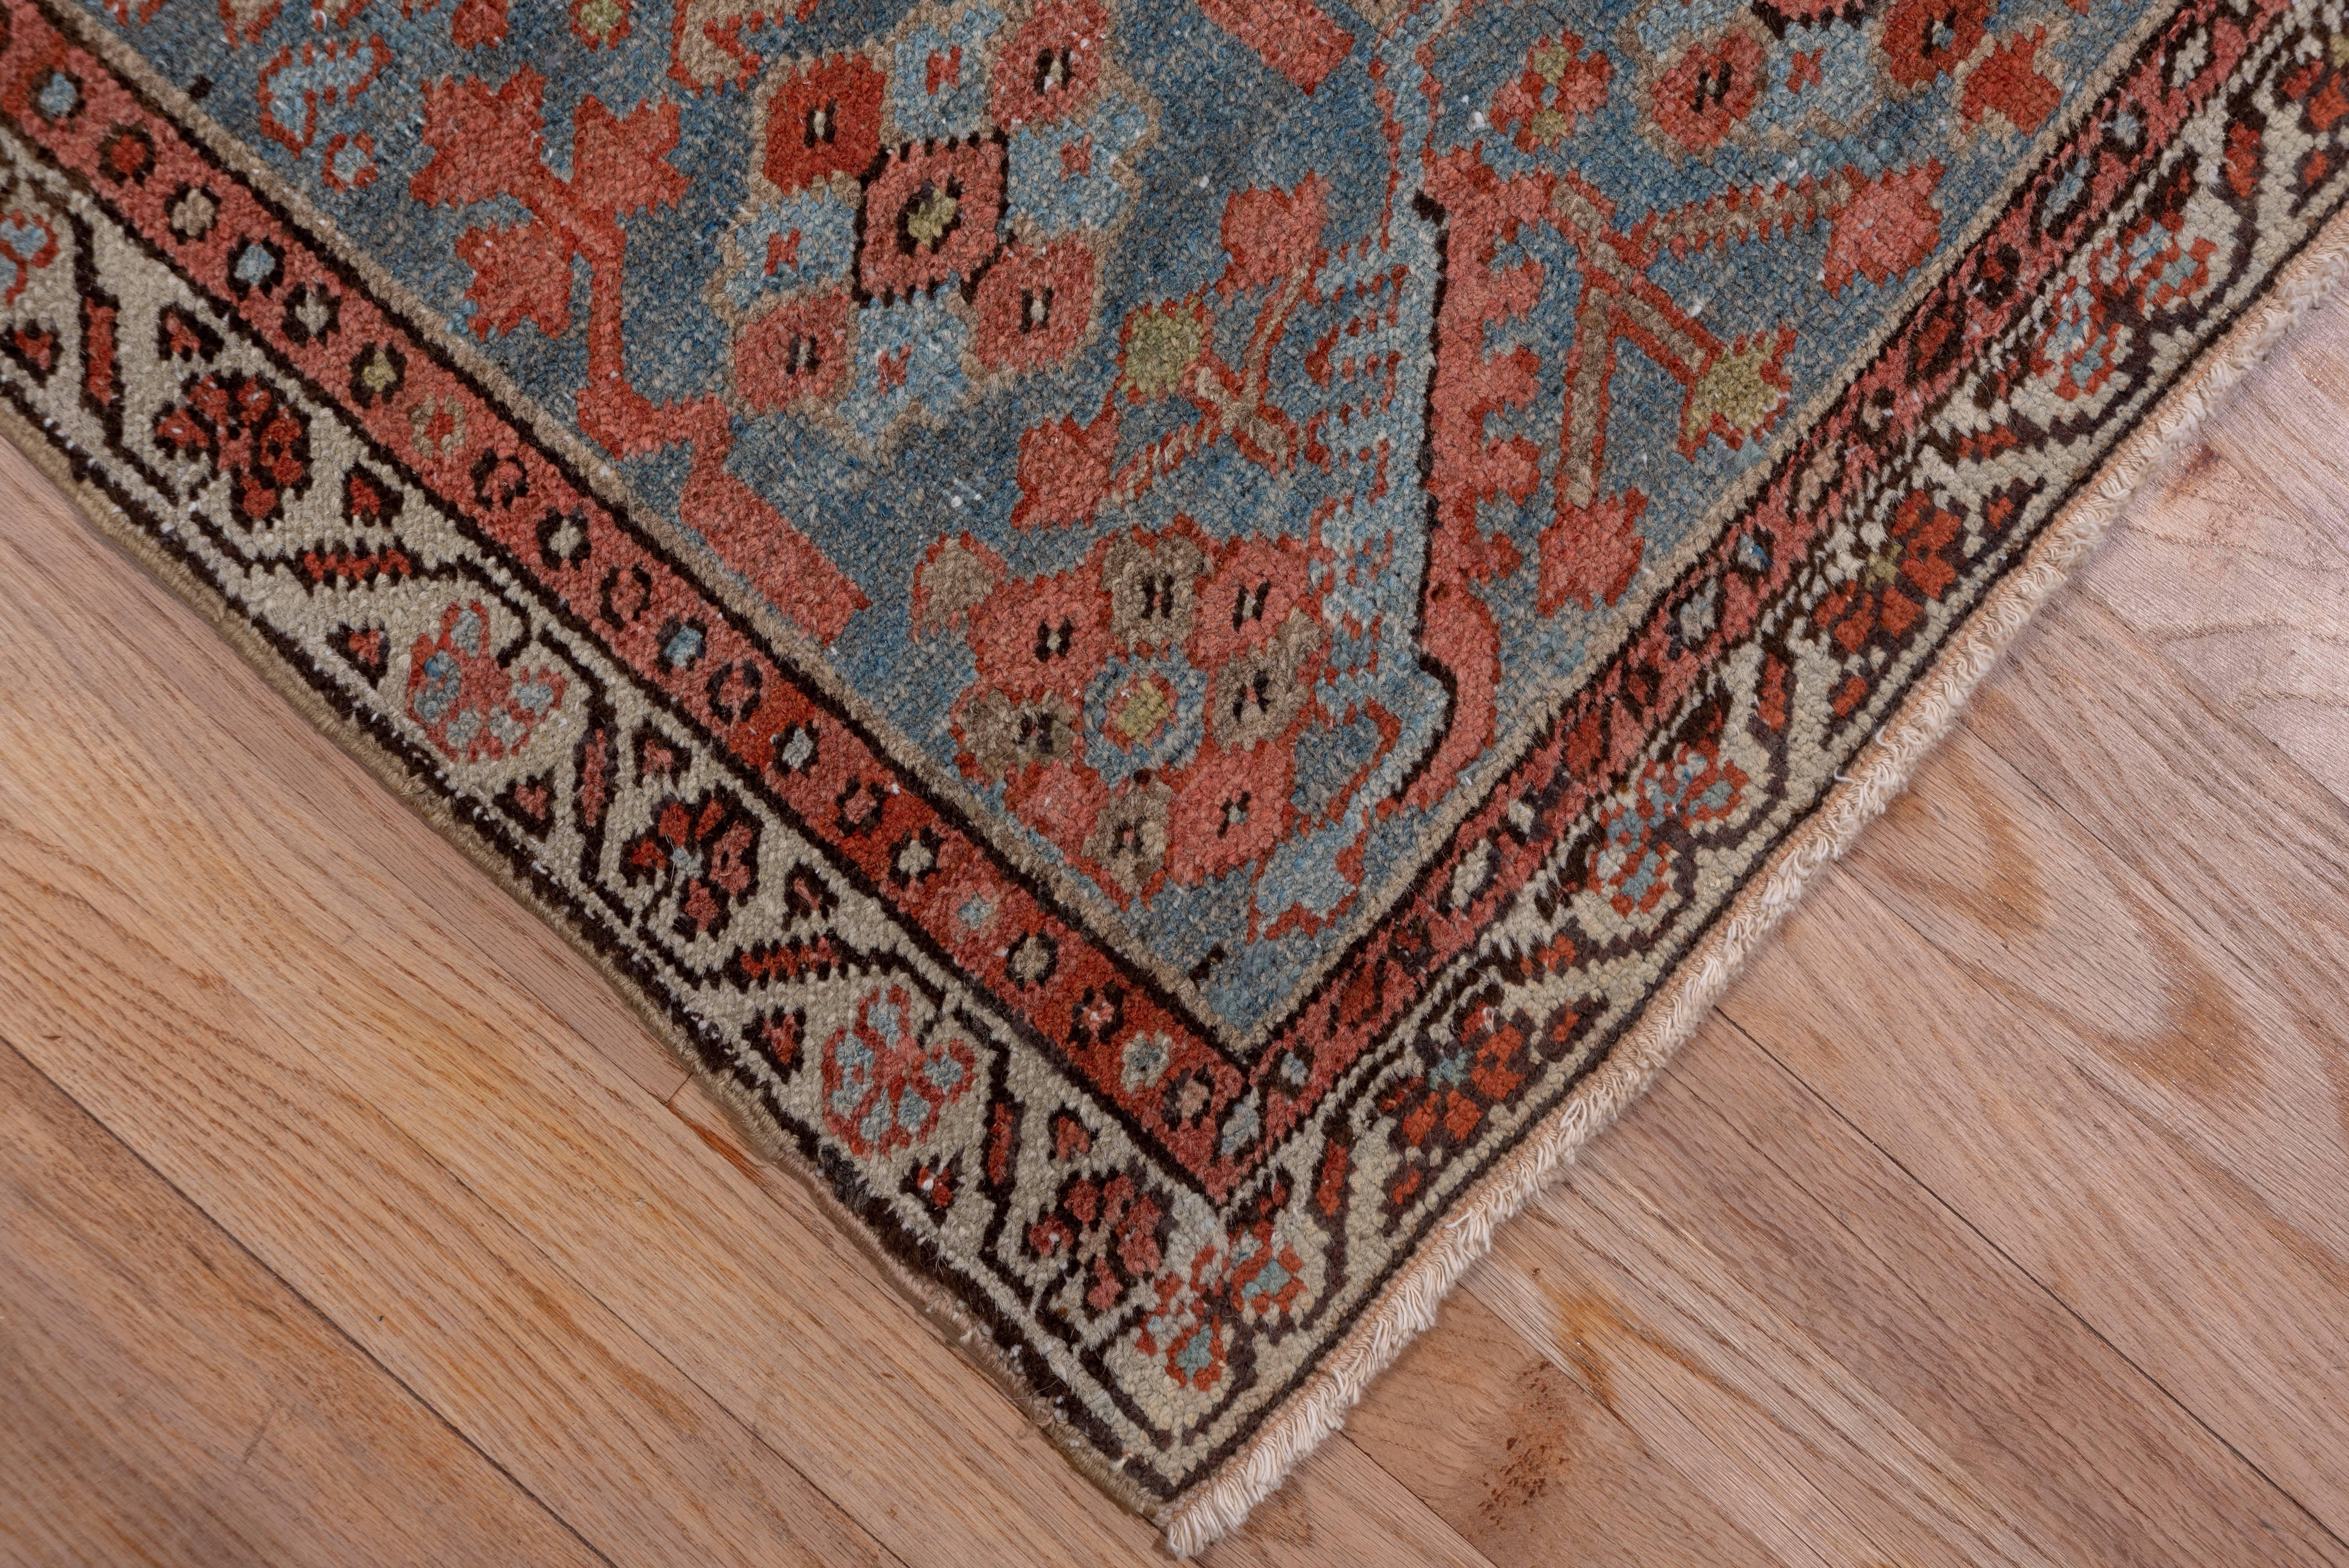 This rural NW Persian carpet presents a green octogram medallion with tonally matching ragged palmette pendants on the mellow madder ground. The light blue corners and border details, along with the natural dye palette overall give this carpet a